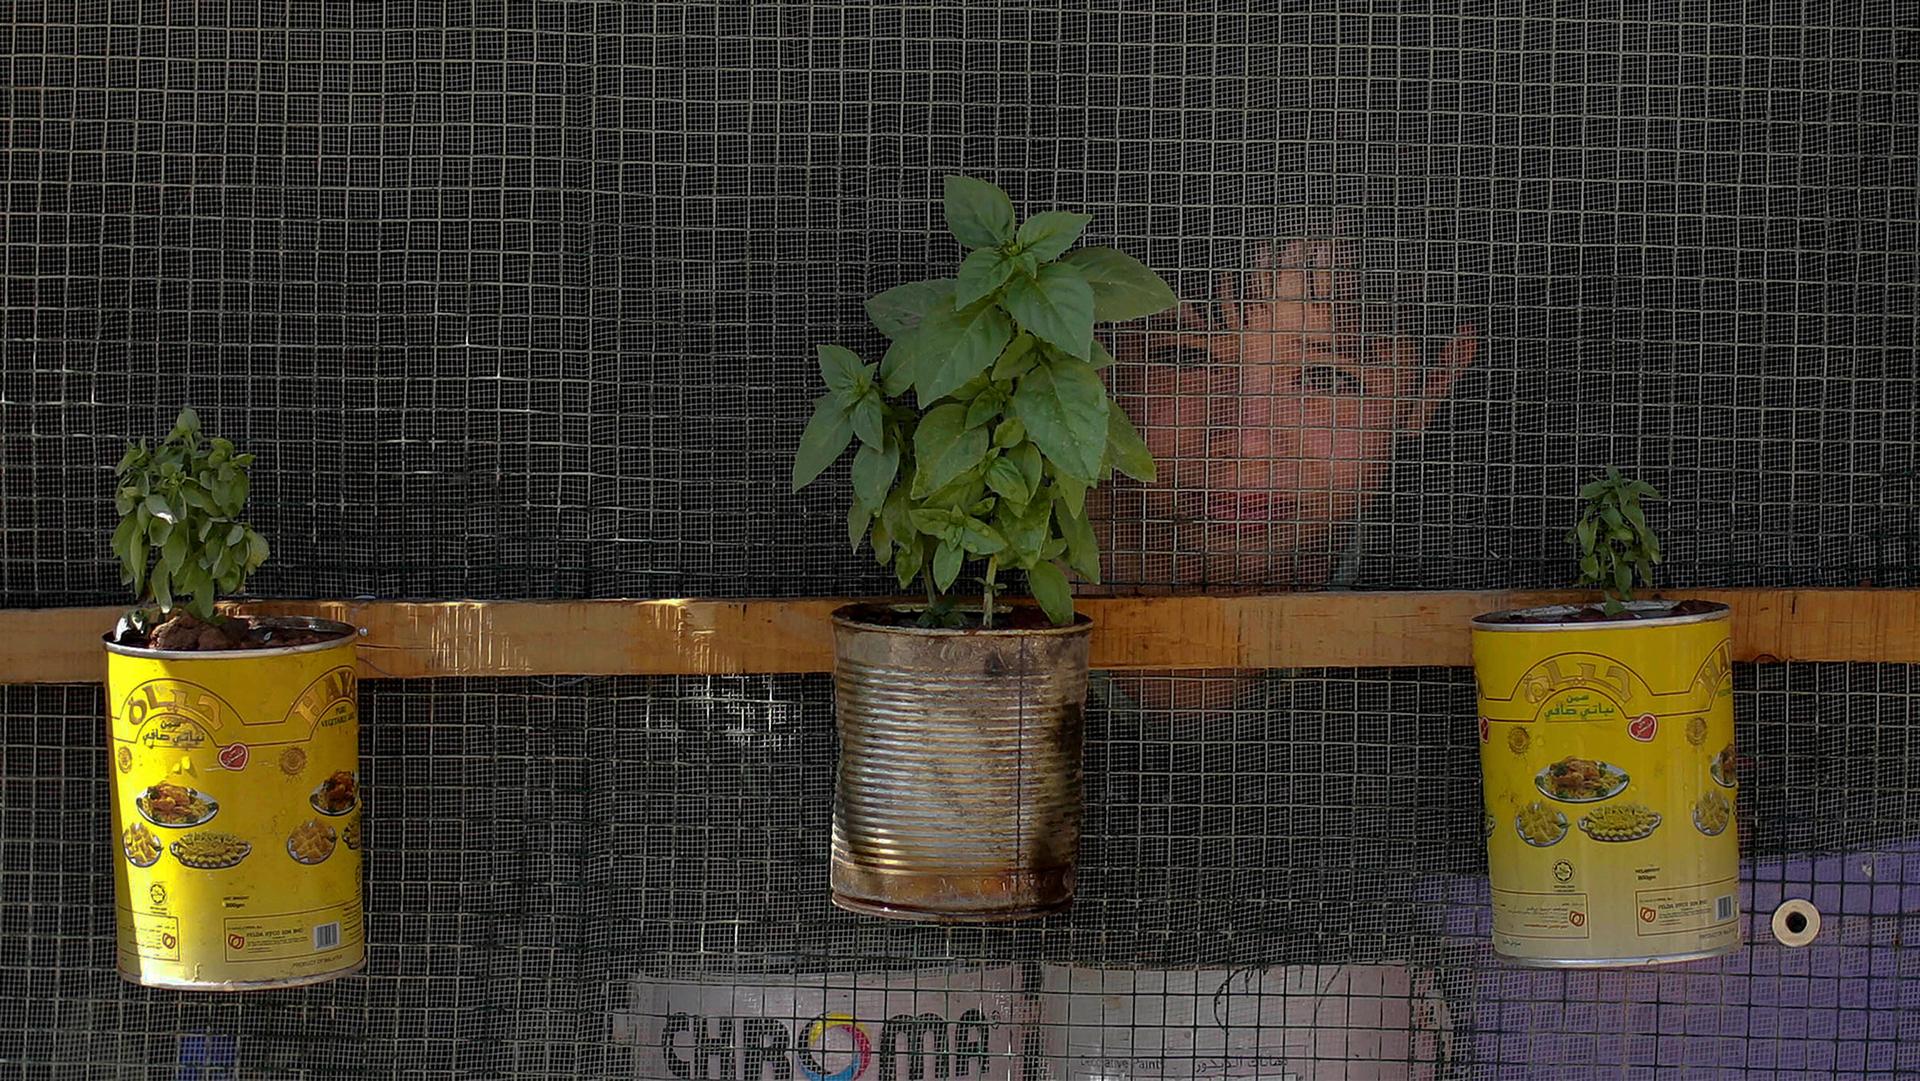 Syrian boy looks through window at refugee camp with plants placed in yellow and white cans attached